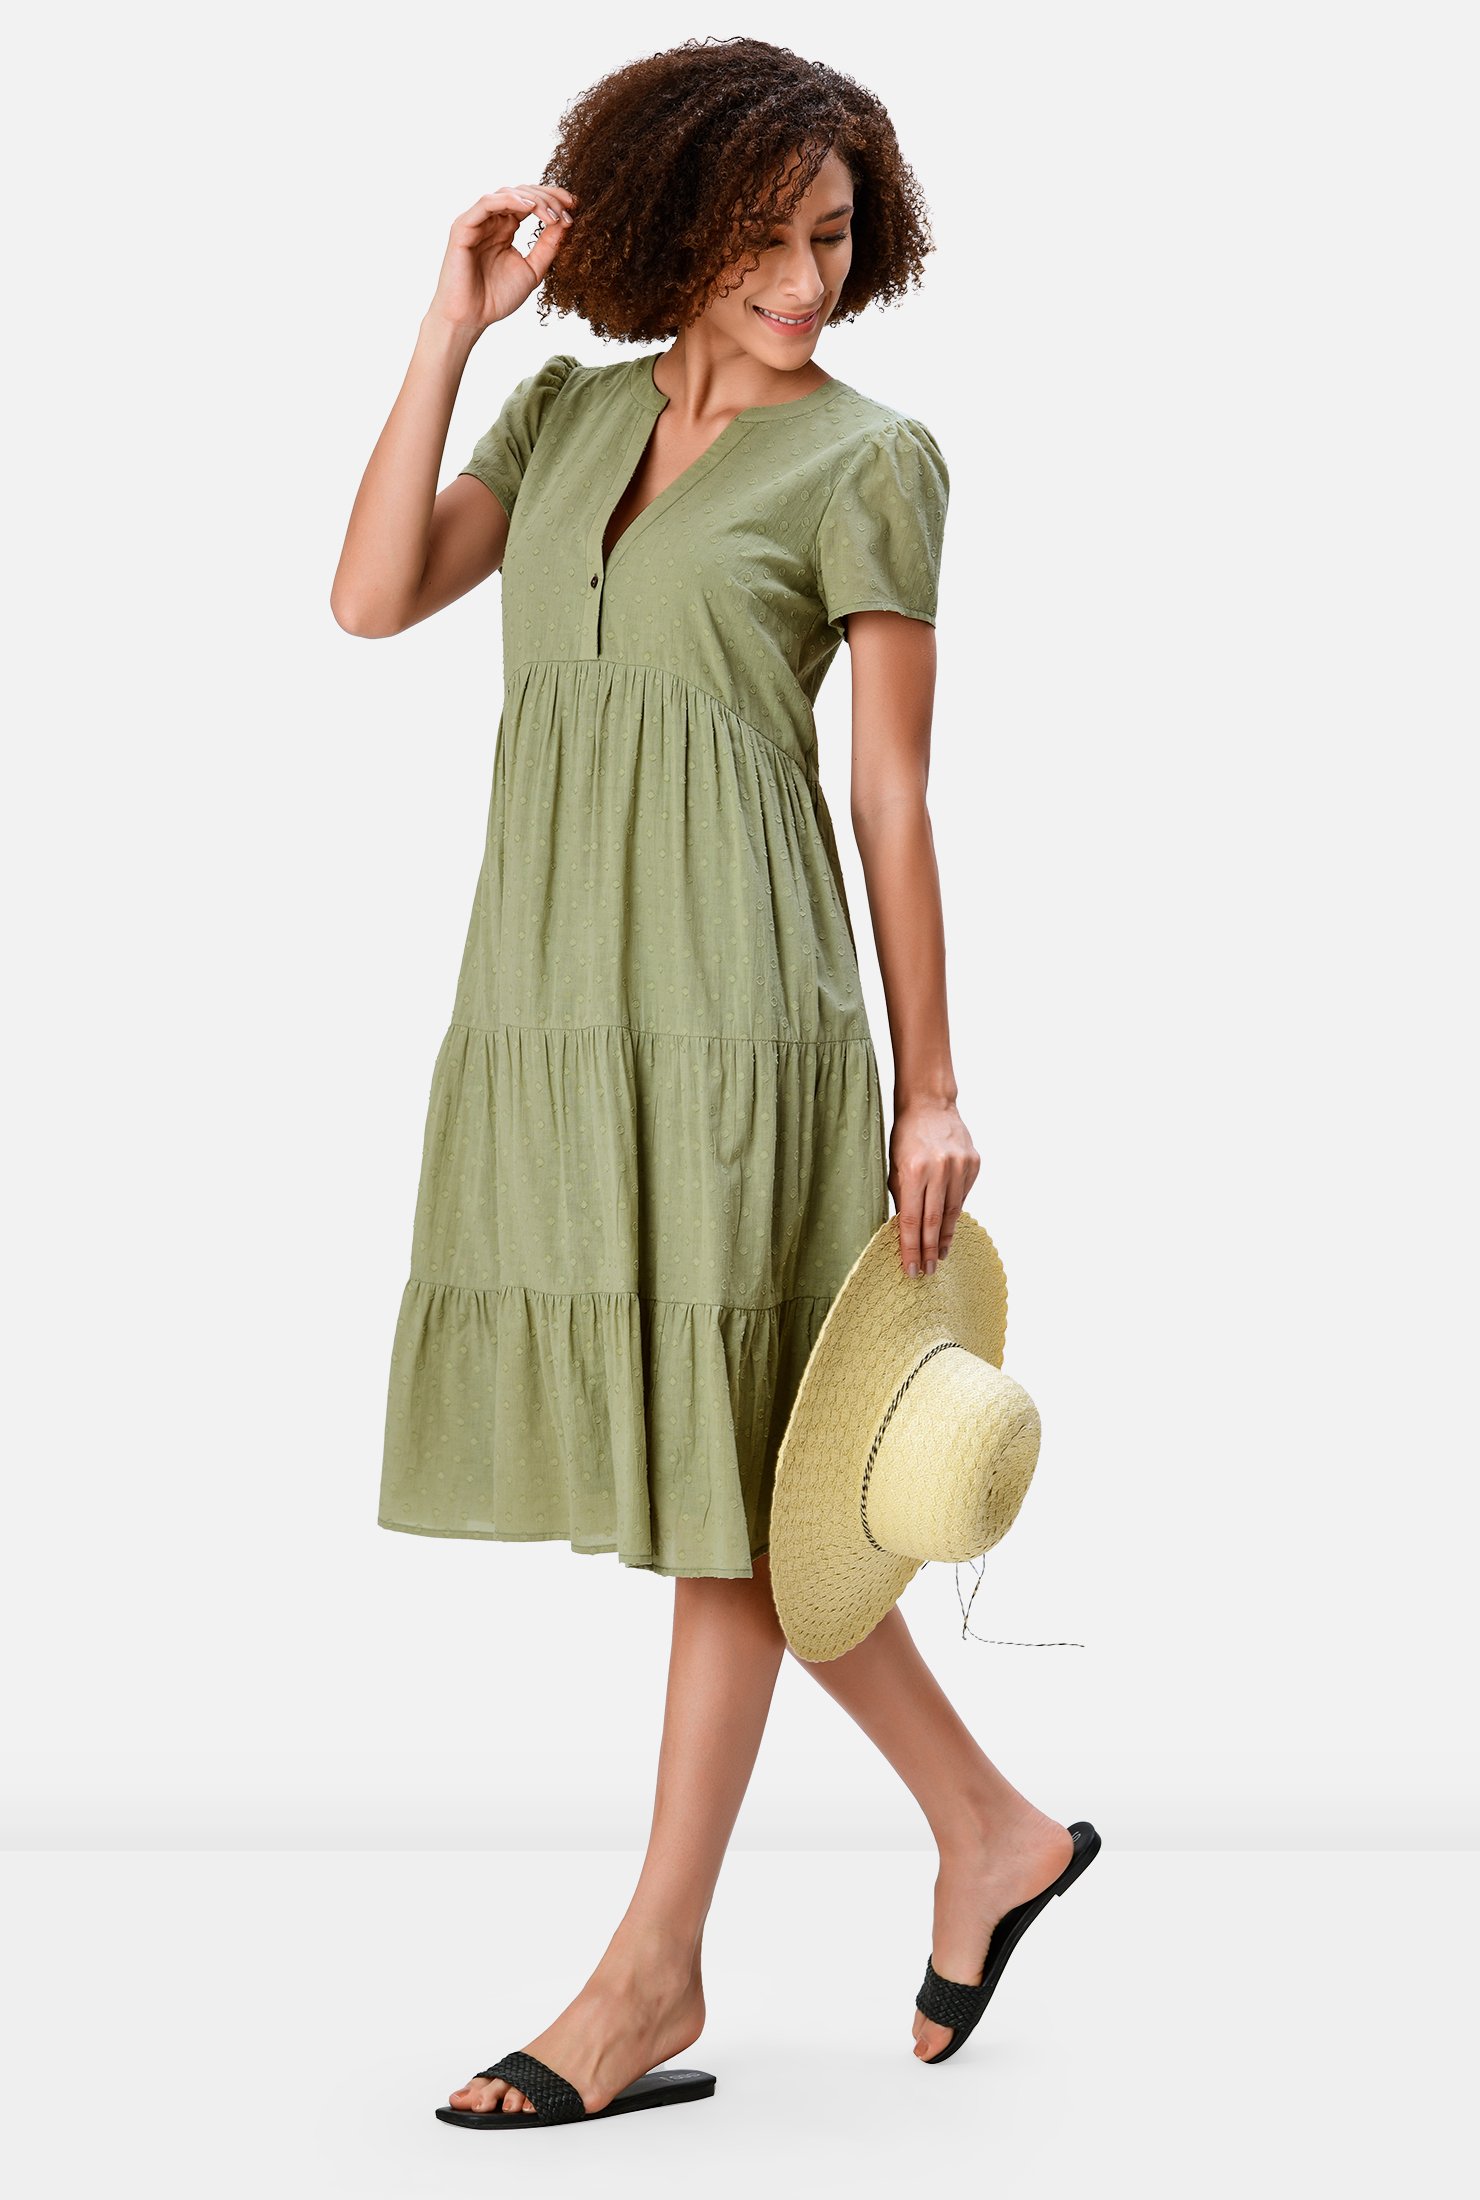 A sunny summer calls for a feminine piece in a pretty palette, and our swiss dot cotton voile dress with easy tiers is made for those lovely warm days and nights. 